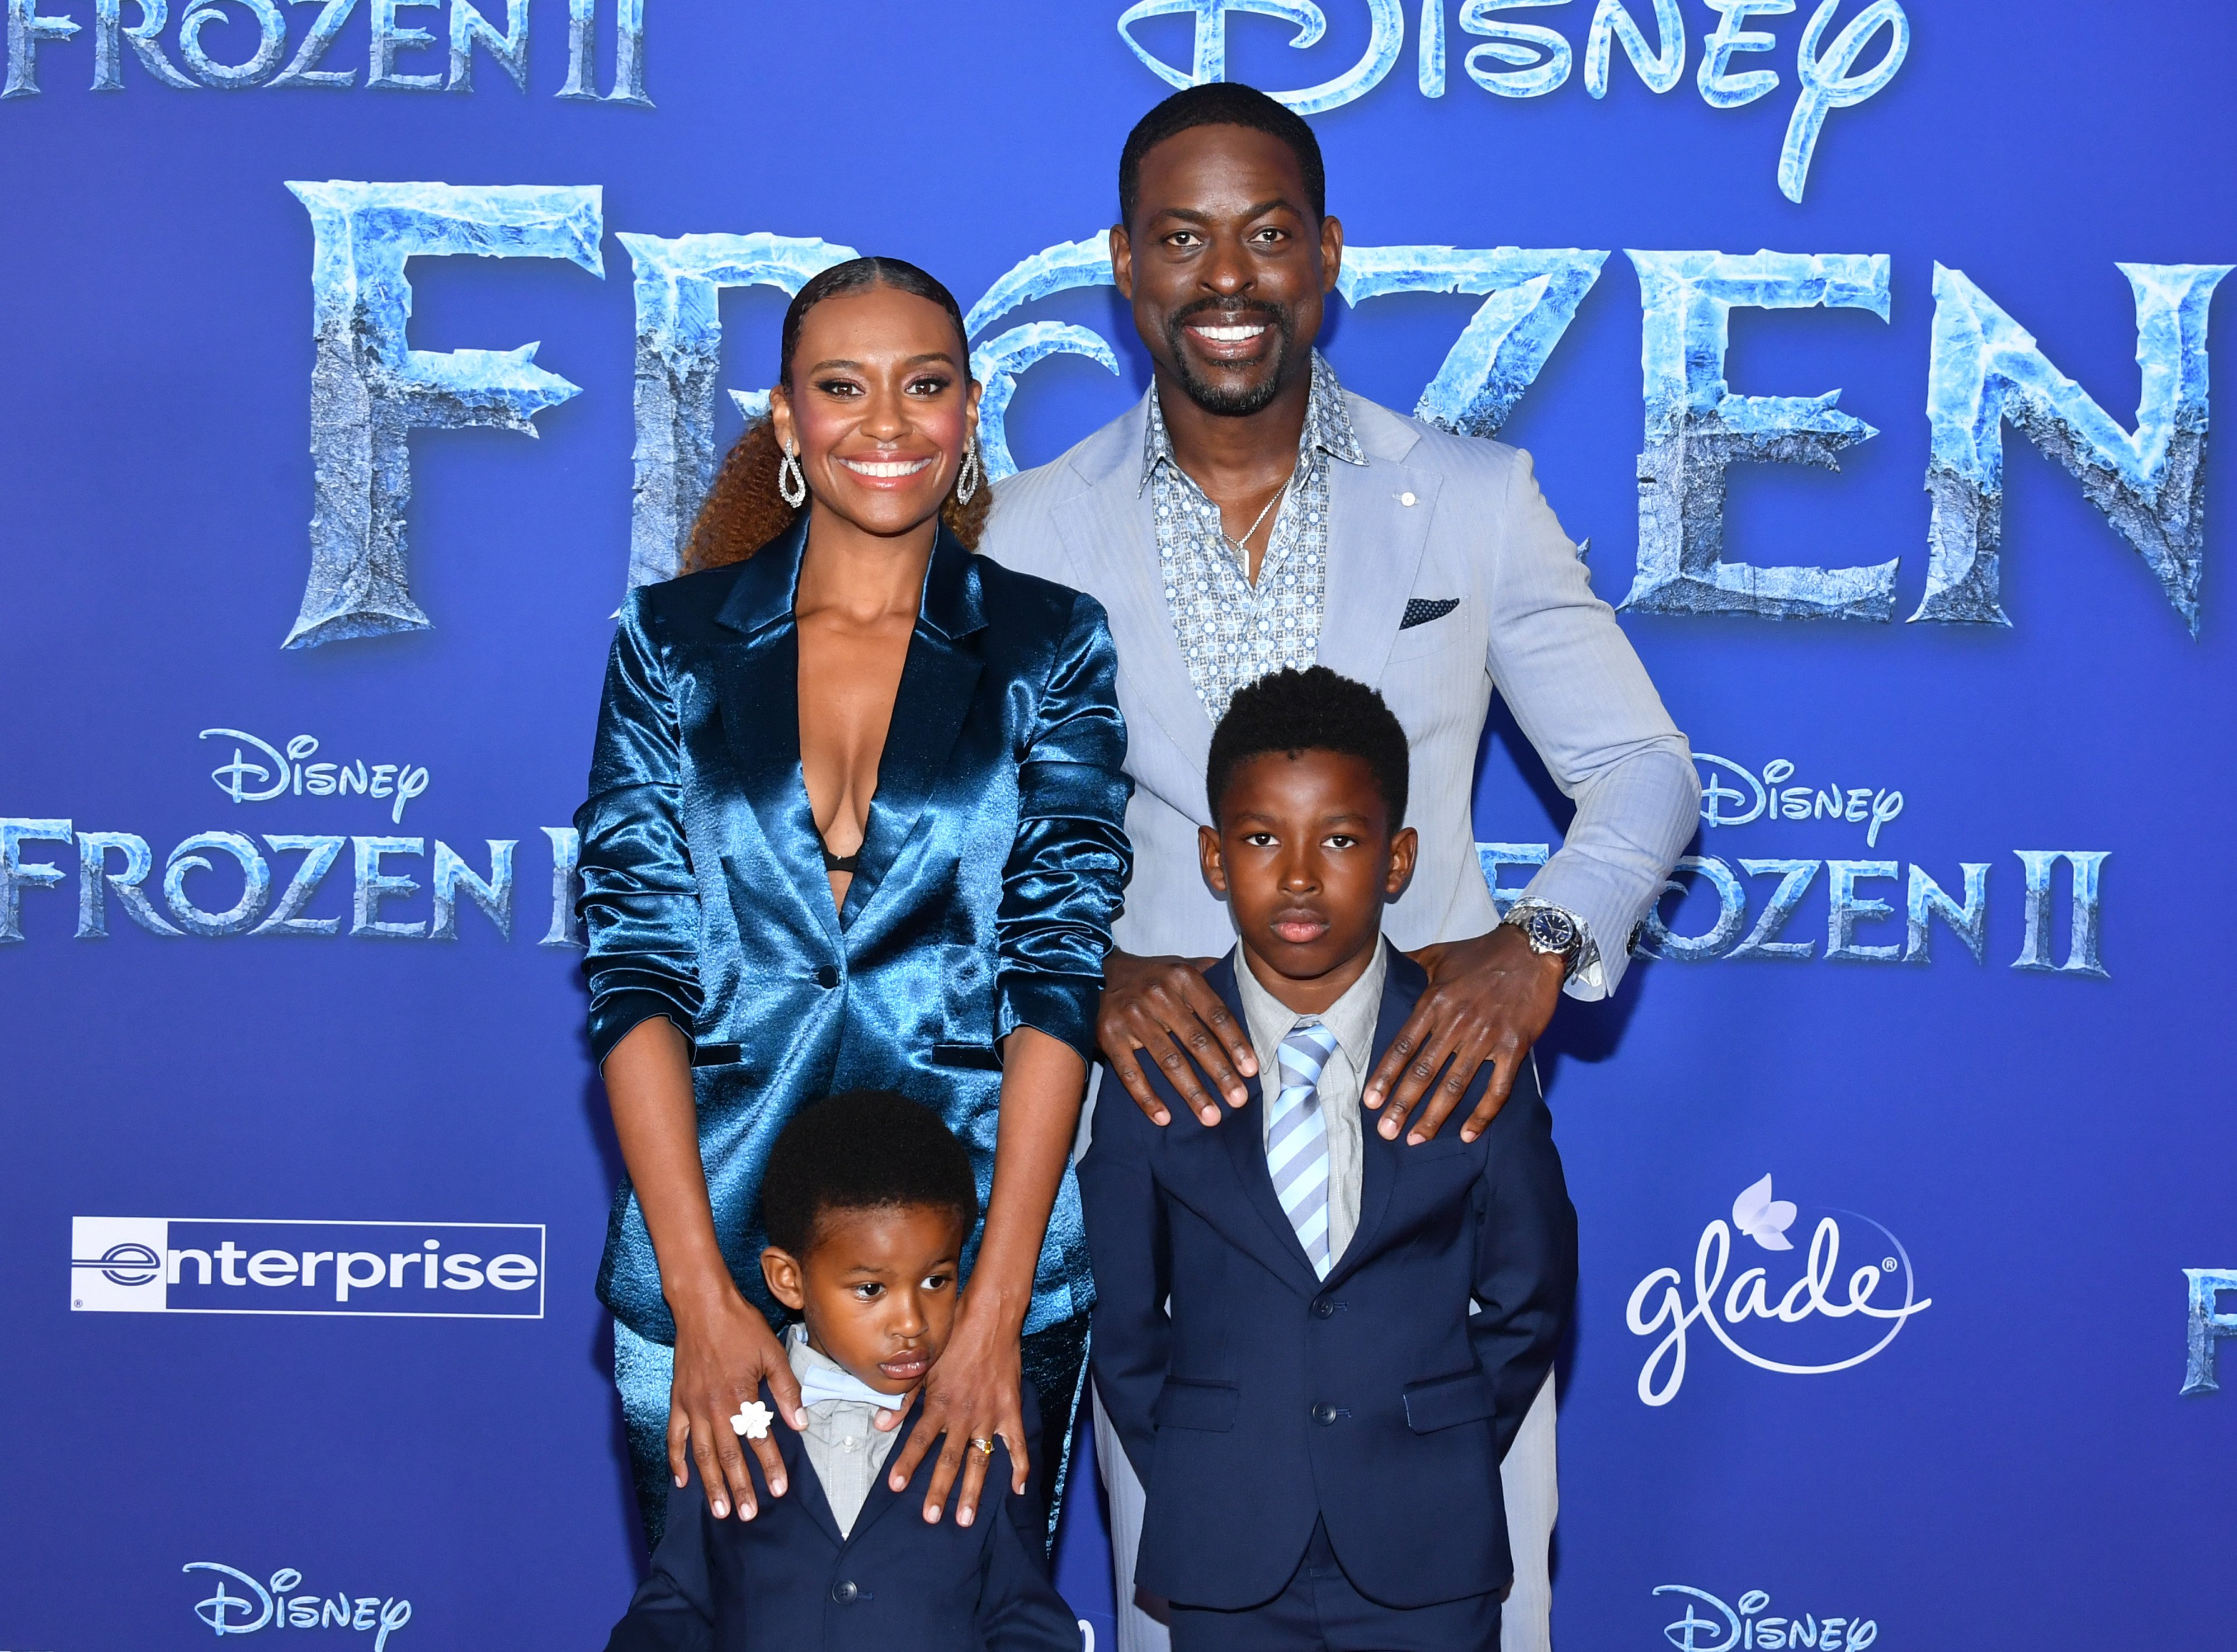 Ryan Michelle Bathe and Sterling K. Brown with children attend the premiere of Disney's "Frozen 2" at Dolby Theatre on November 07, 2019 | Photo: GettyImages